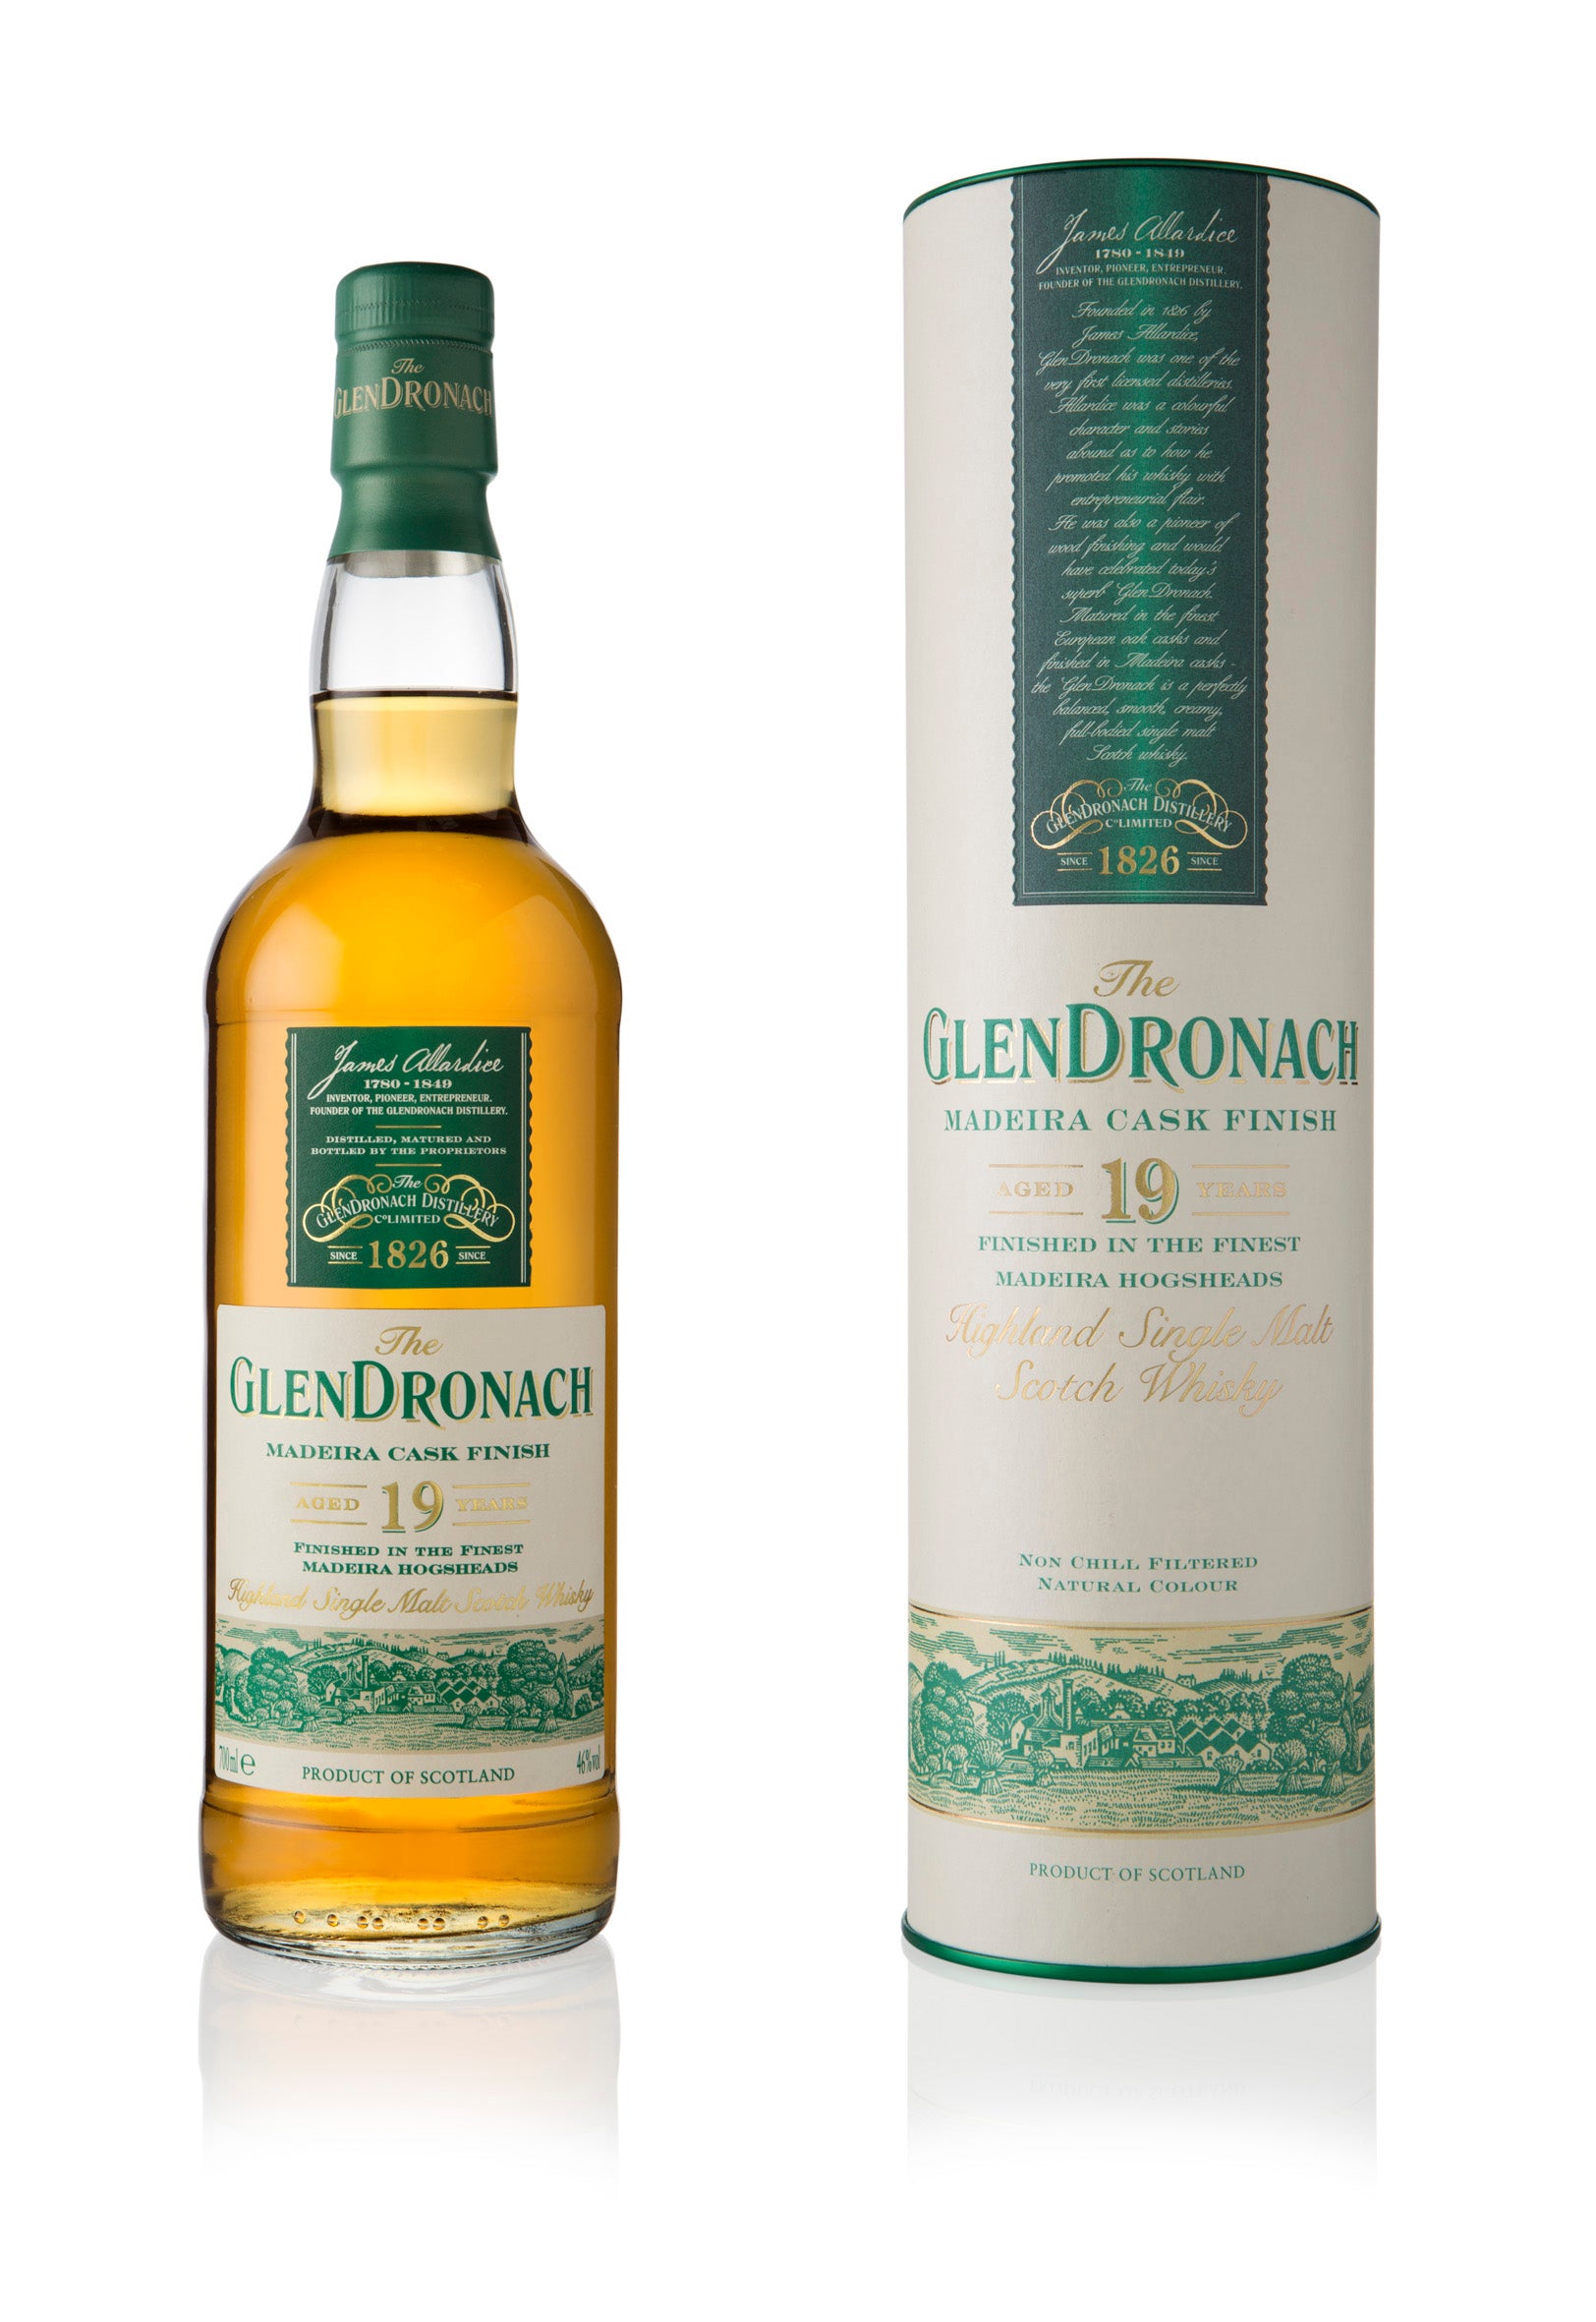 Coming soon from GlenDronach & BenRiach!